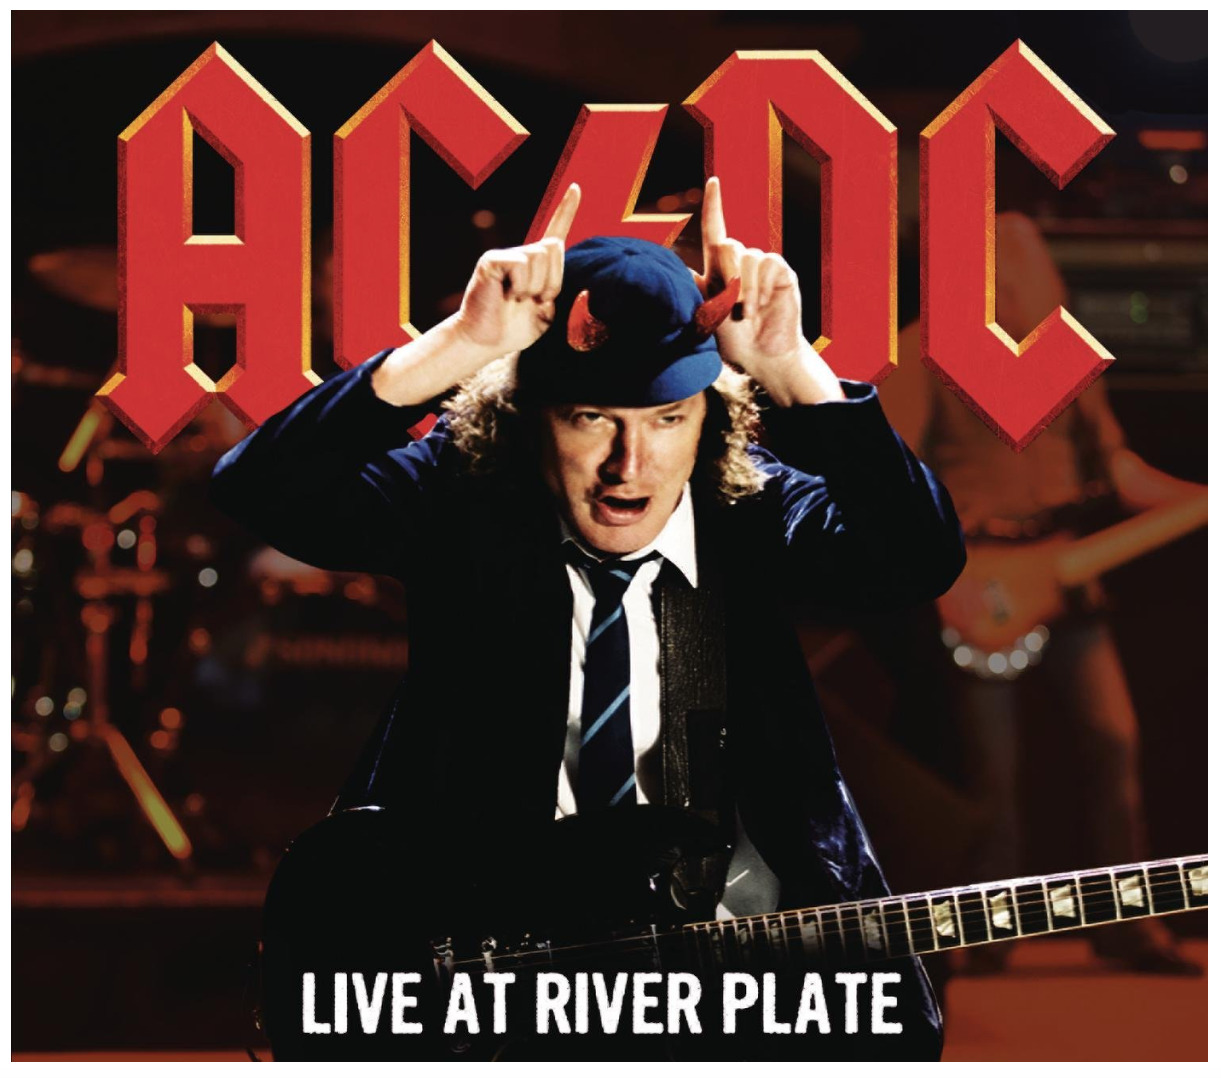 AC/DC - Live at River Plate (2-CD) • NEW • Malcolm Young, Best of, Greatest Hits